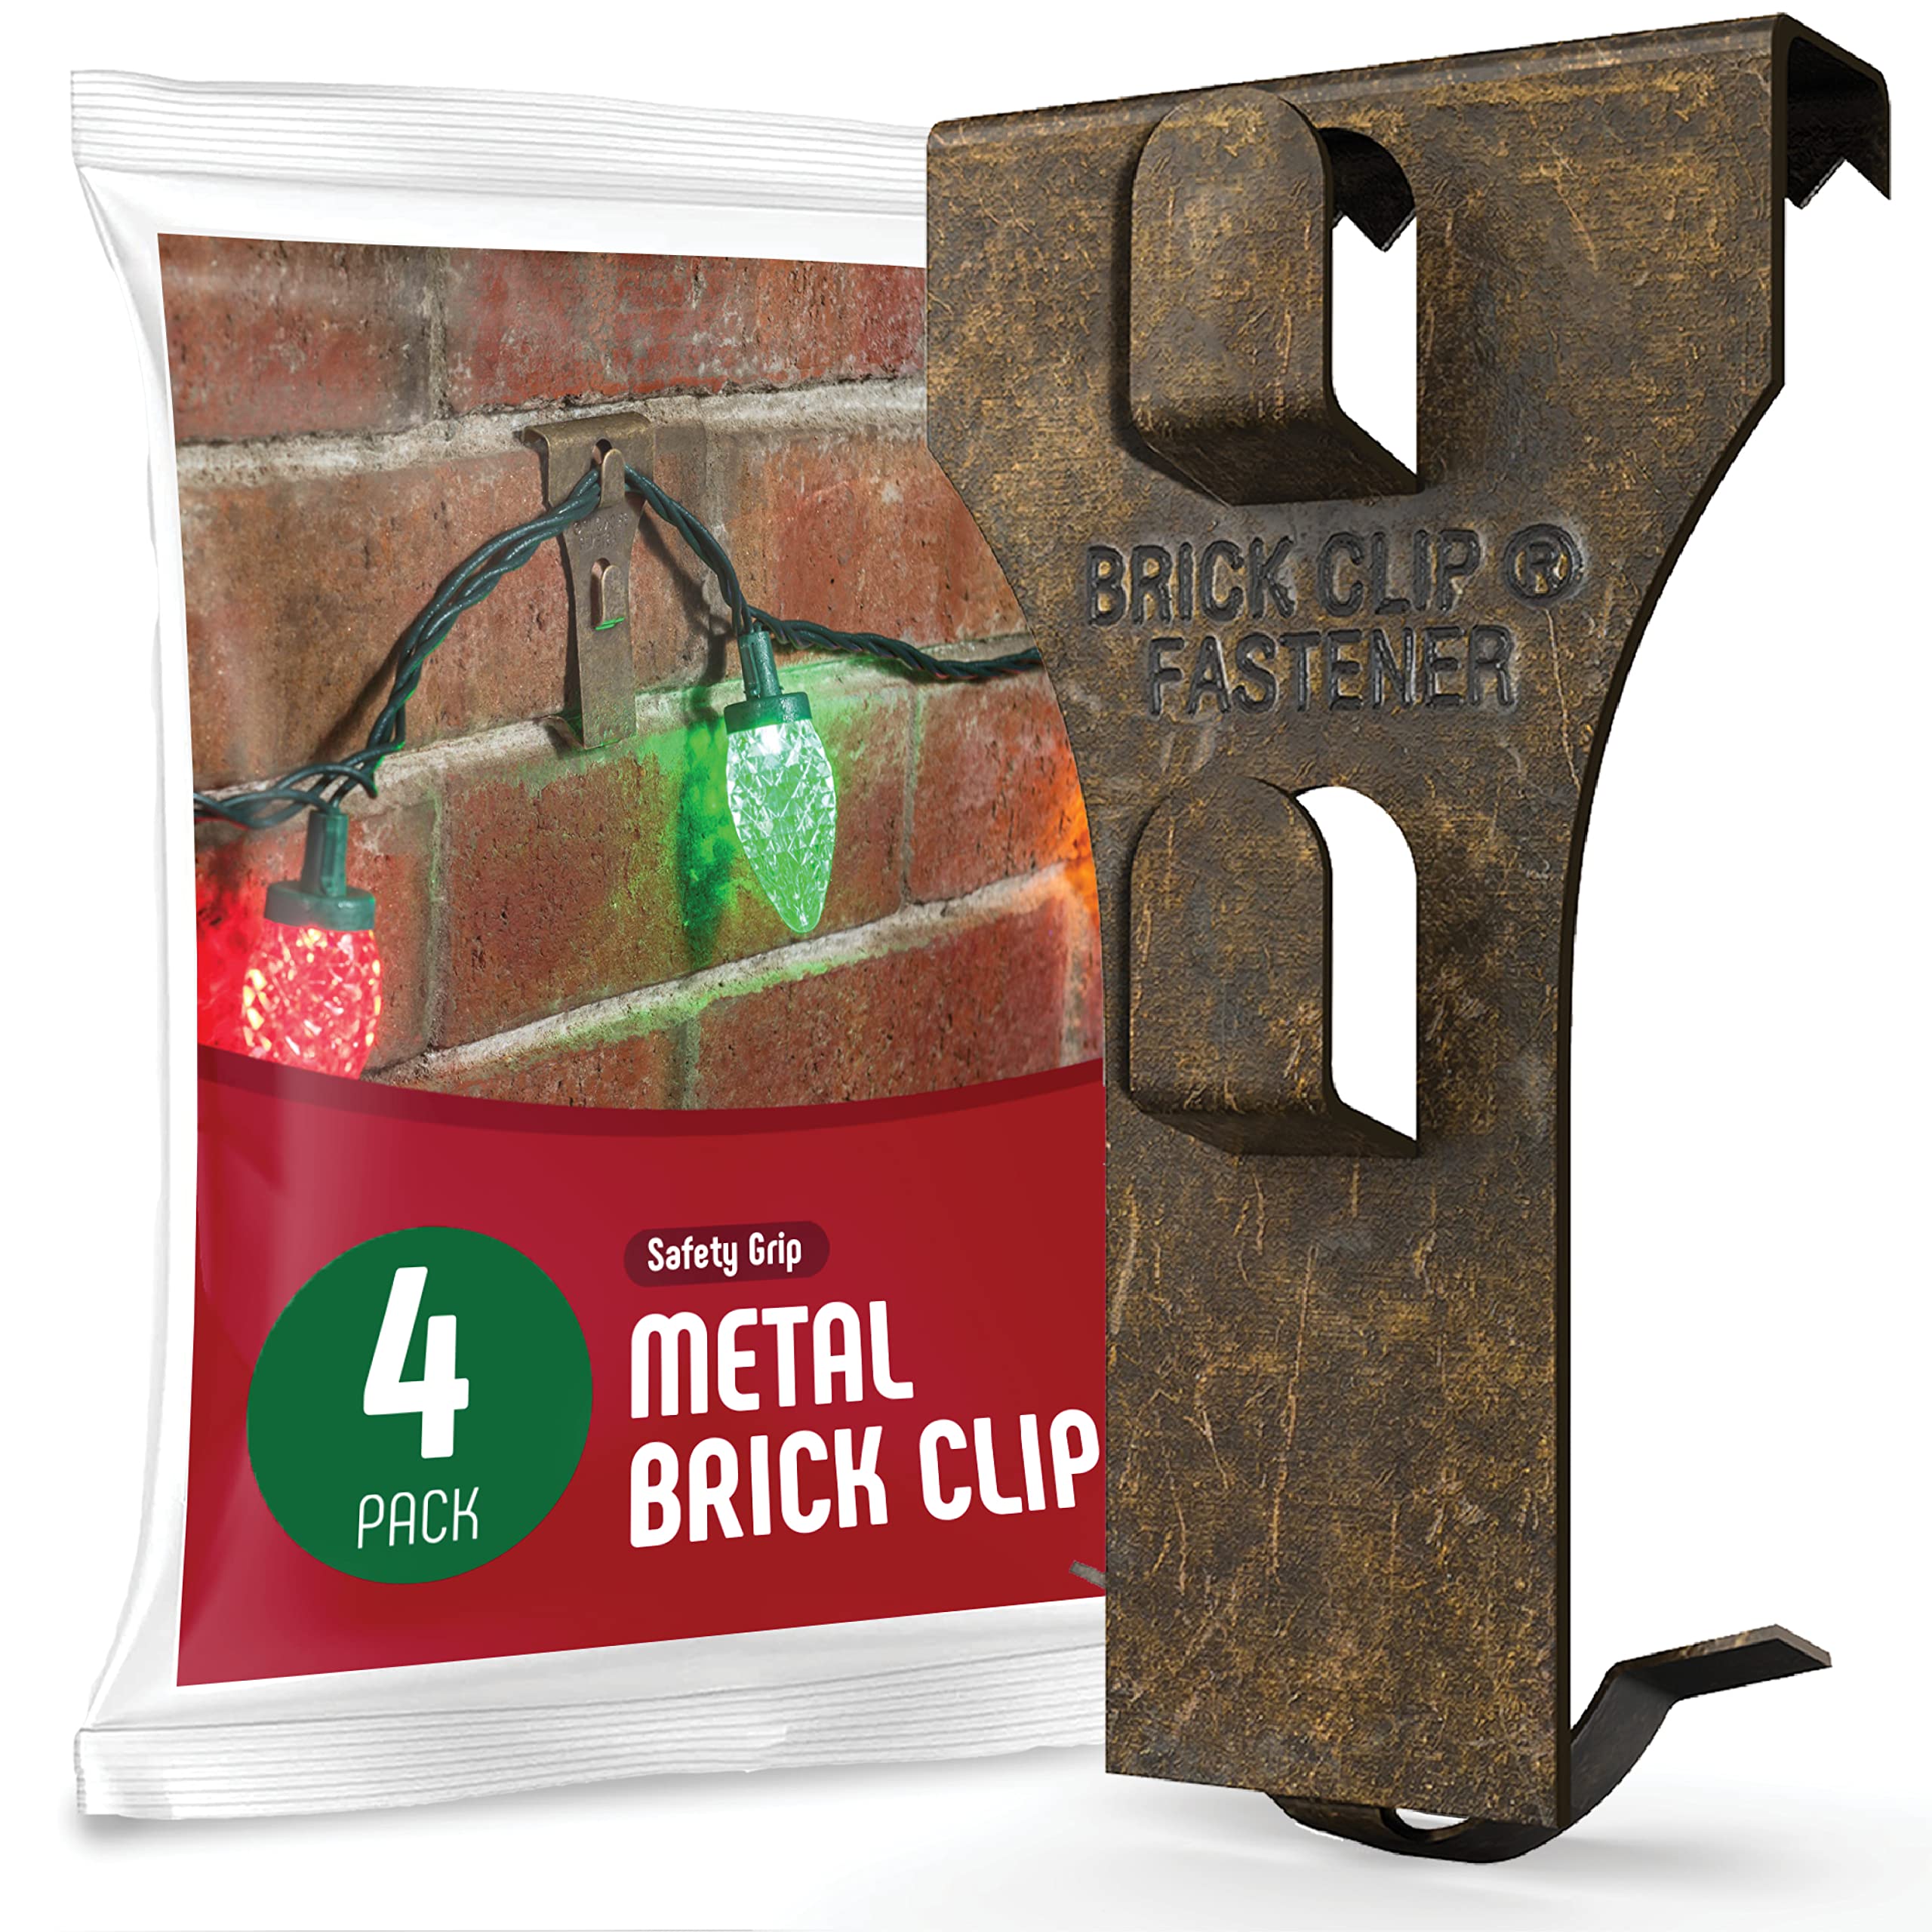 Brick Clips Hanger [Set of 4] Metal Brick Clip for Hanging Outdoors, Hanging Wreaths, Garlands, Lights, Wall Pictures & All D�cor Hanging - Fits Brick 2.1 / 2.2 Inch - Holds Up to 25 Pounds - USA Made